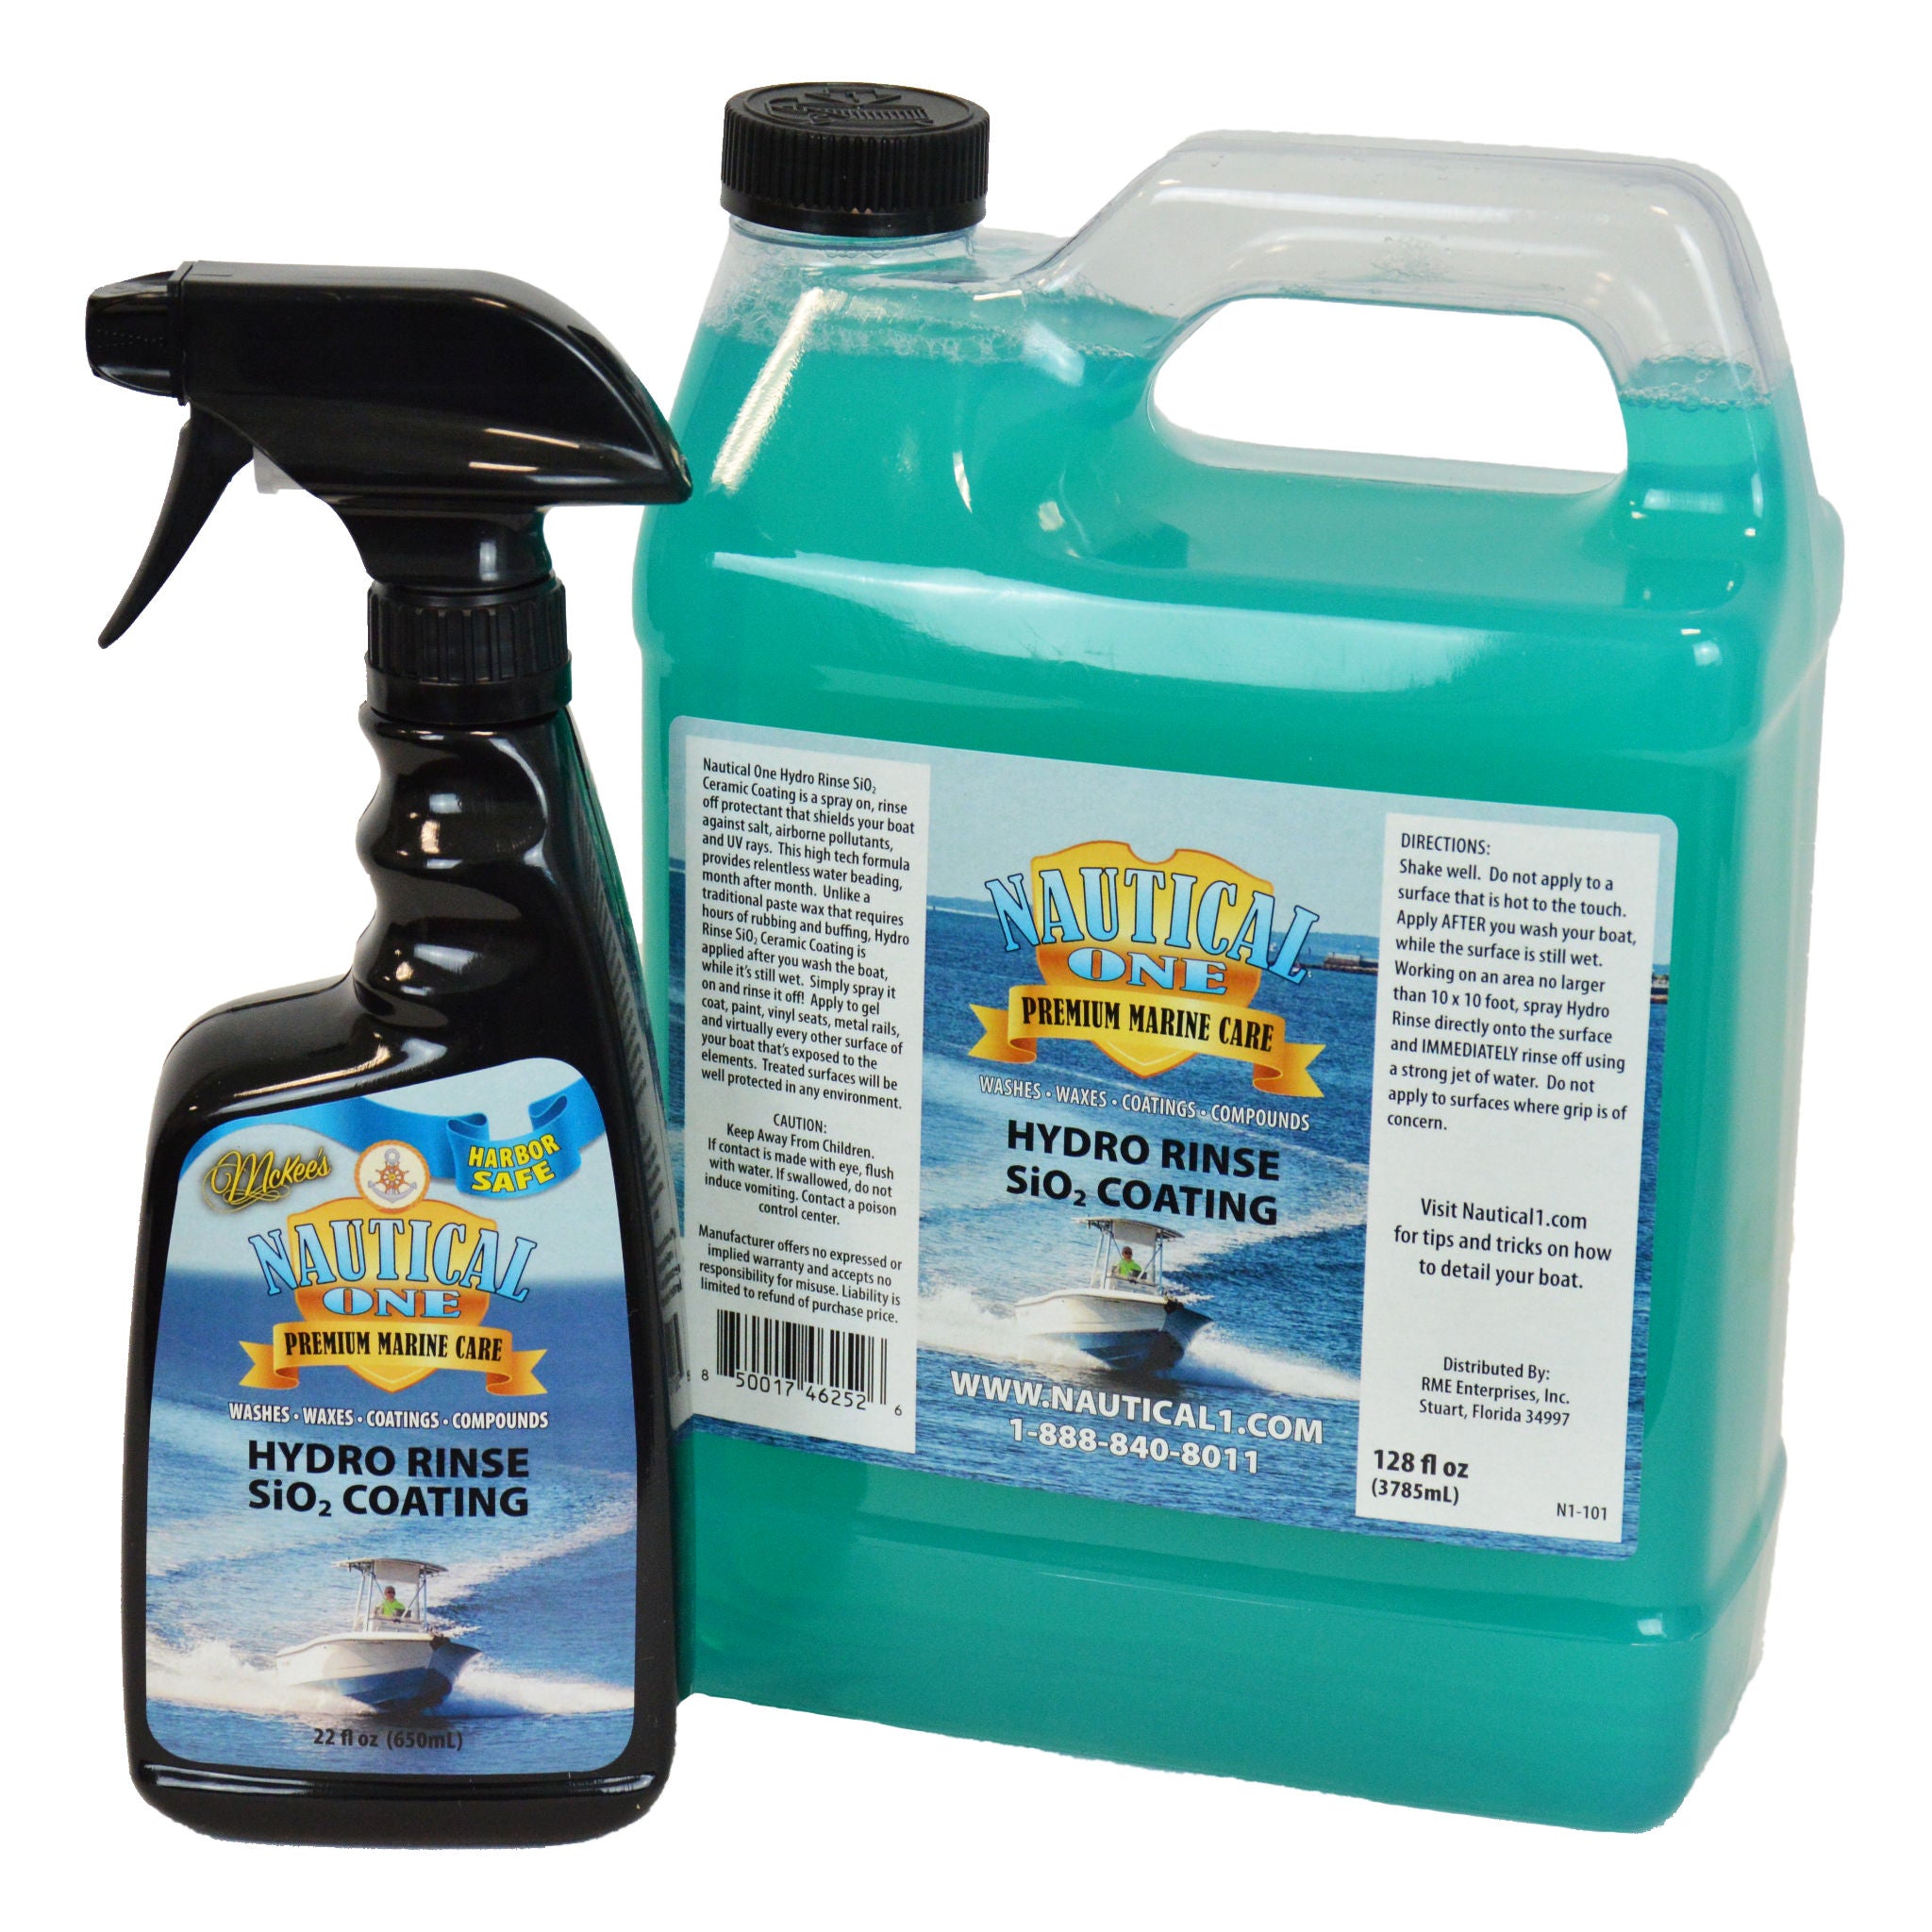 Ultimate Boat Cleaning Kit Boat Wash Soap & Foam Gun Cleaner Sponge Boat Cleaner Products & Microfiber Cloths Pontoon Boat Accessories Marine